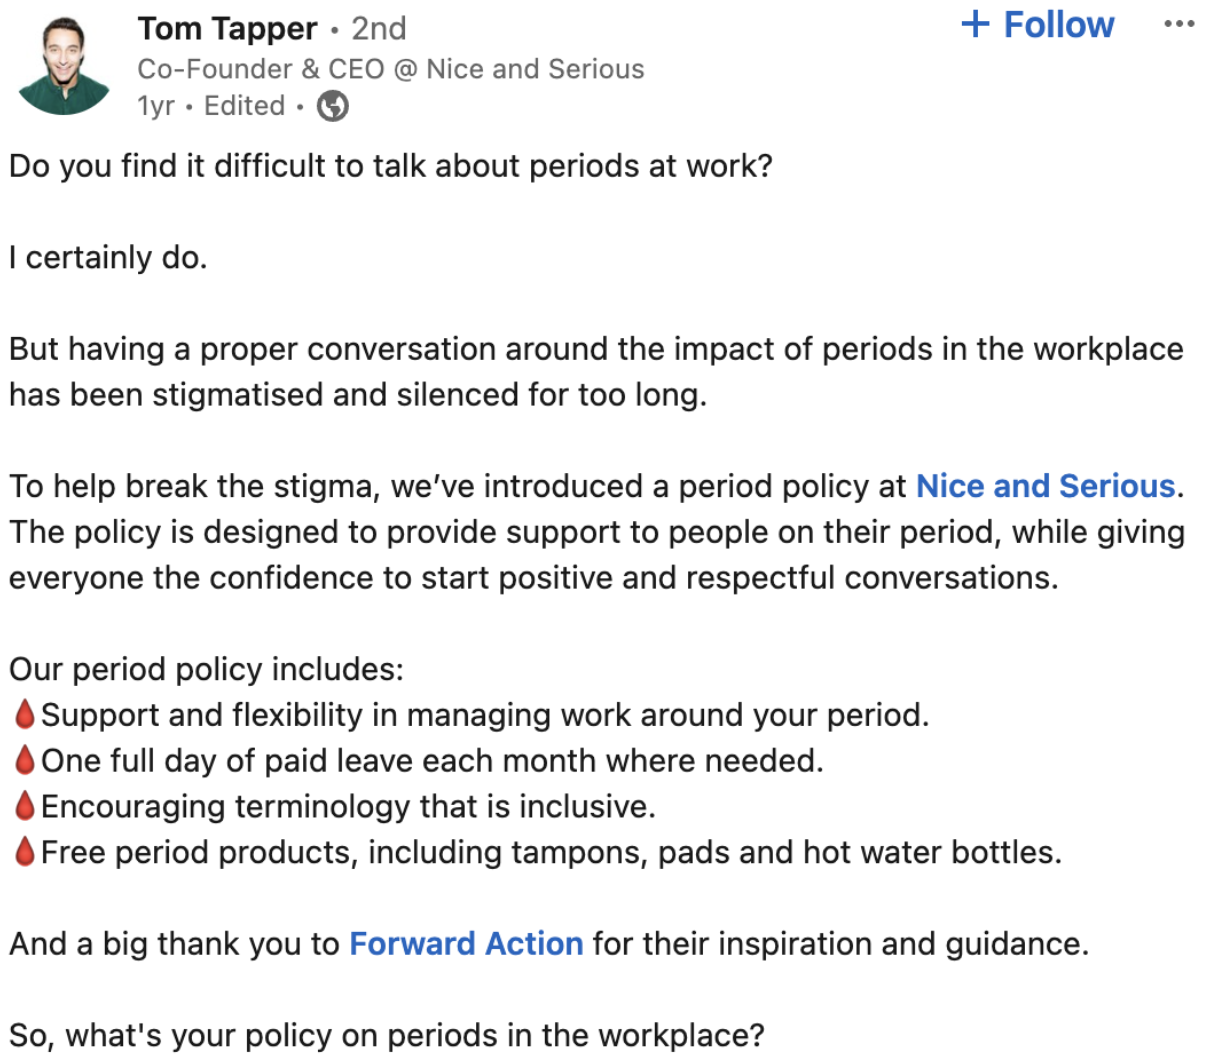 A screenshot from LinkedIn where Tom Tapper explains the new period policy